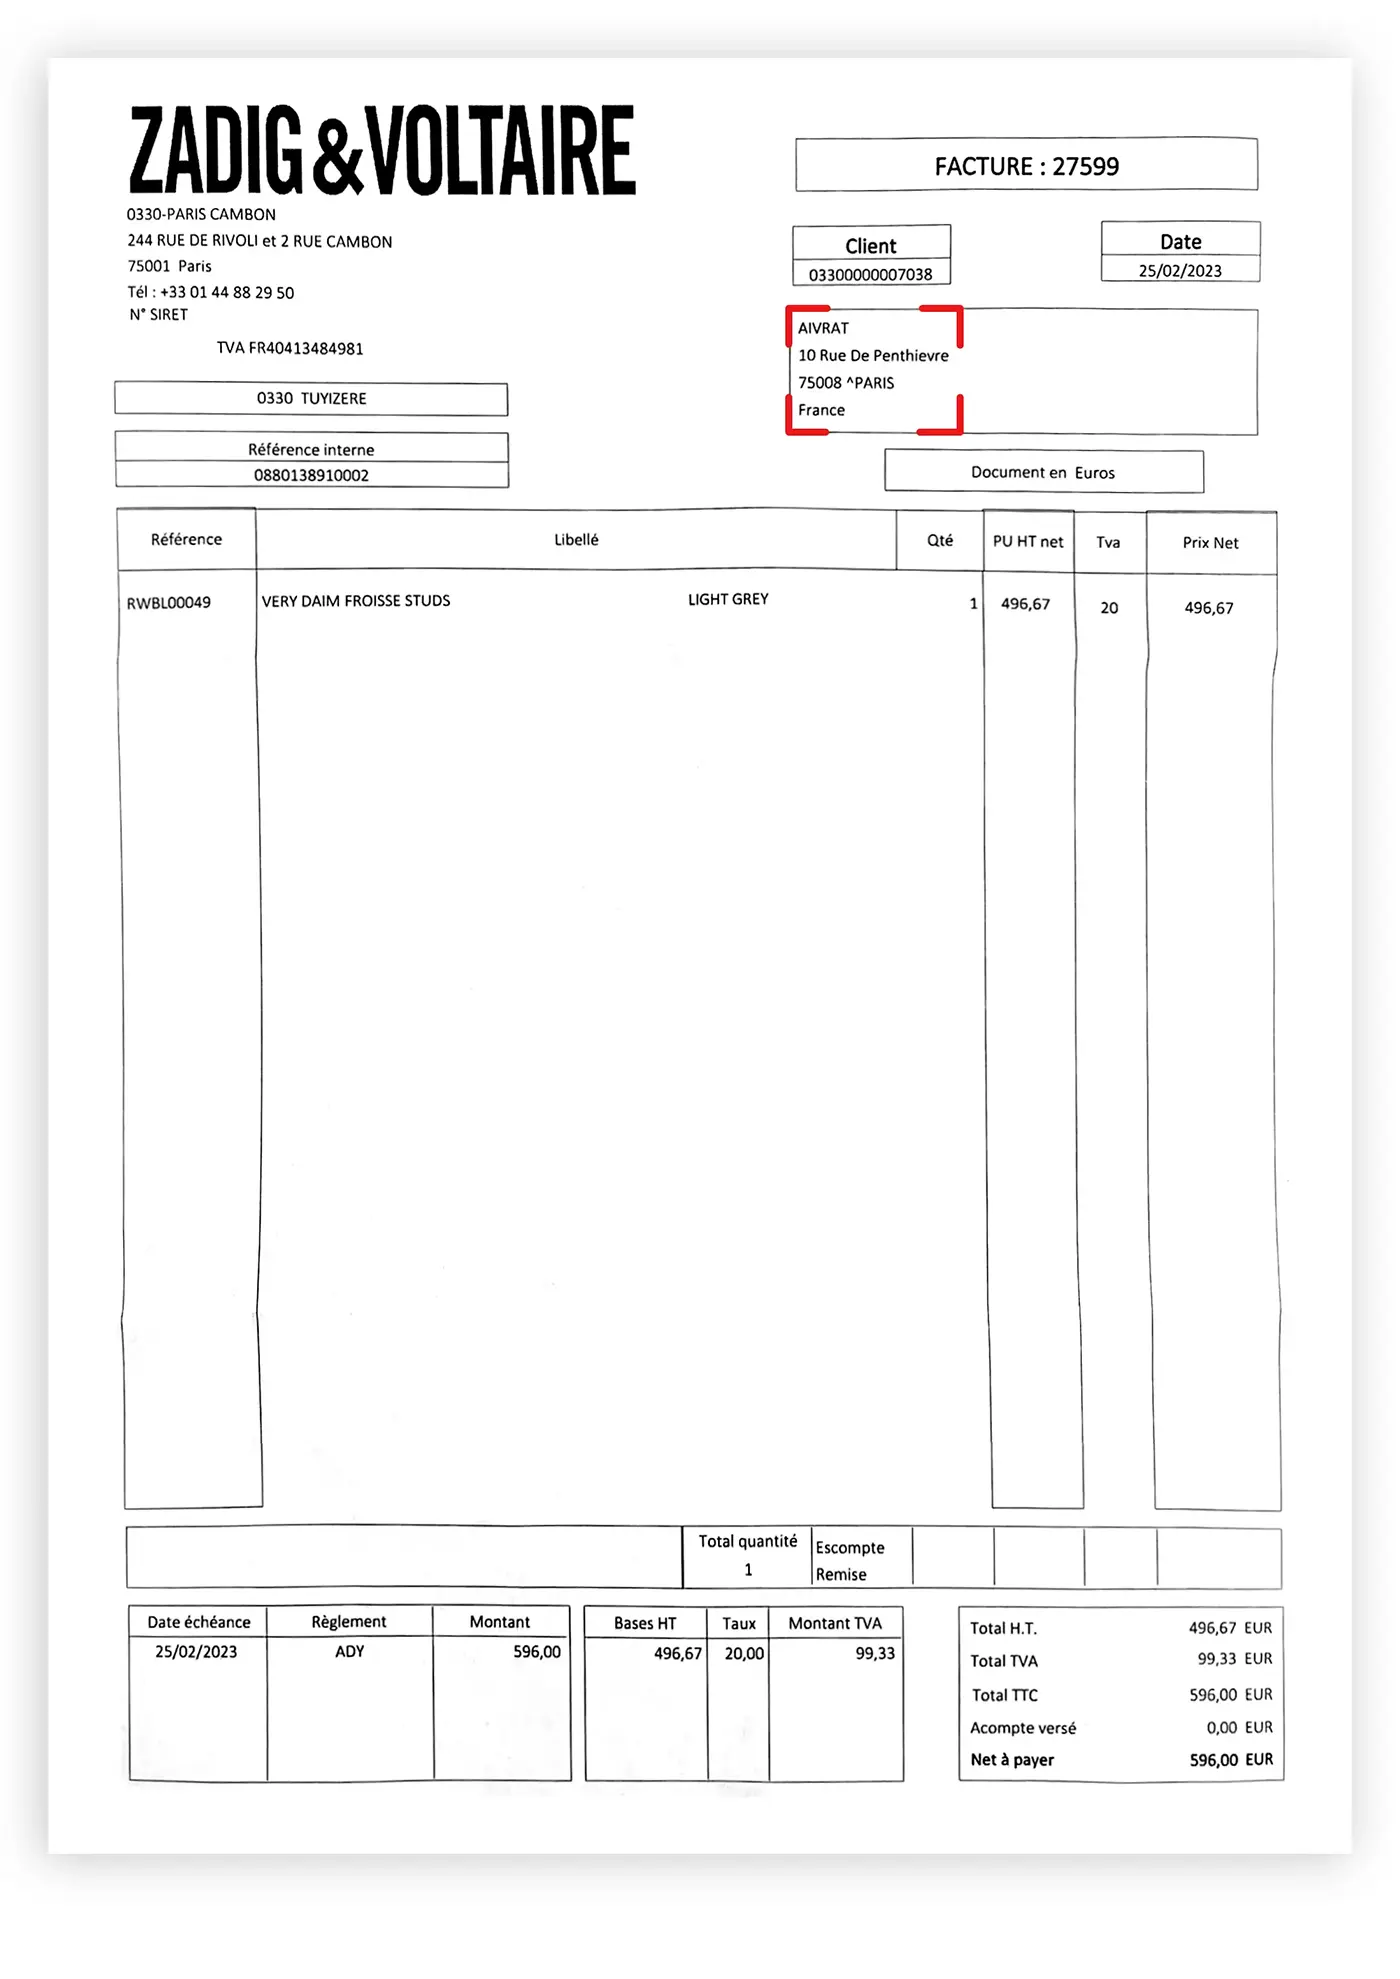 Valid invoice for tax free shopping with Airvat app in Zadic voltaire